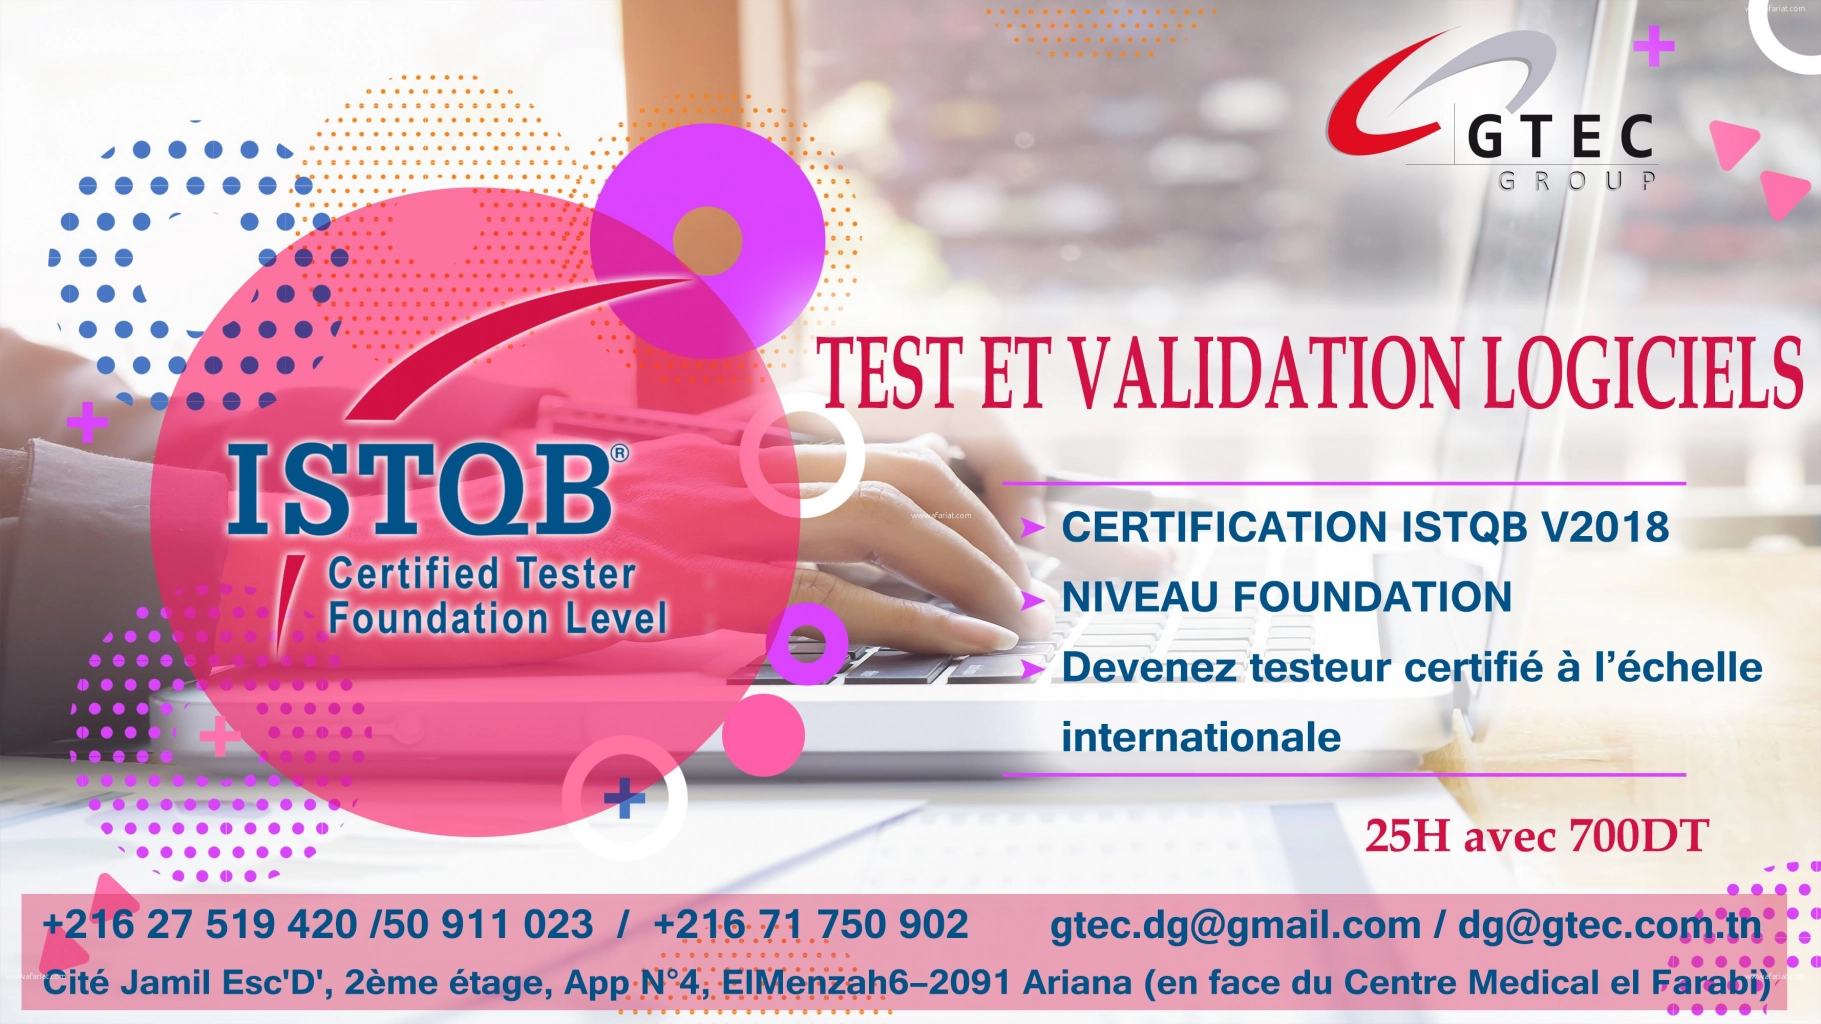 Formation Test & Validation ISTQB chez GTEC GROUP